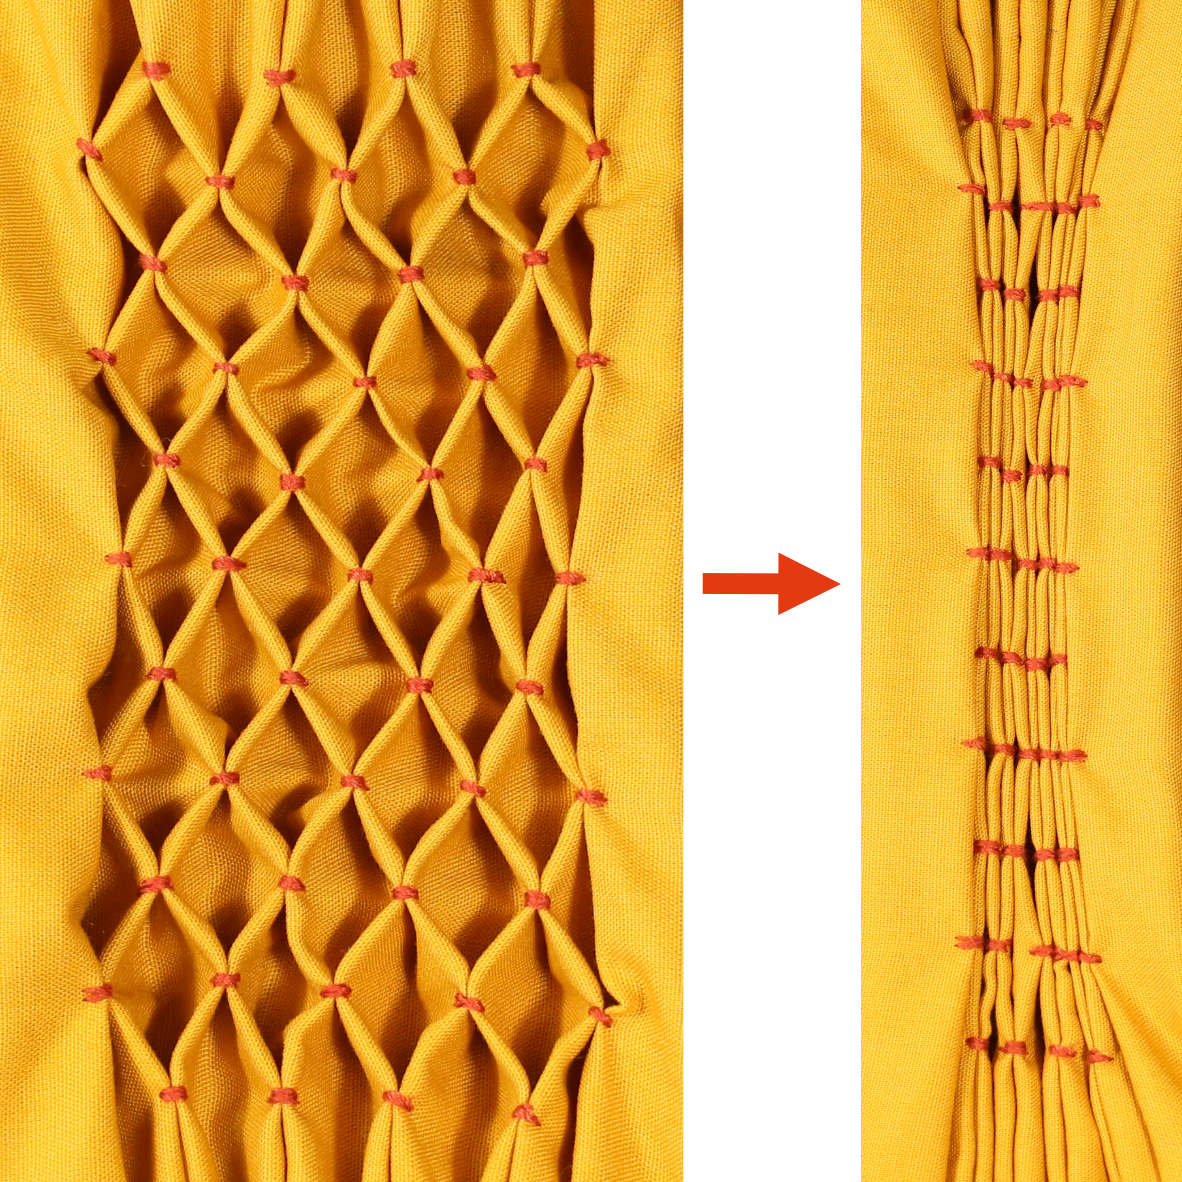 Image of Flextiles smocking open and then closed